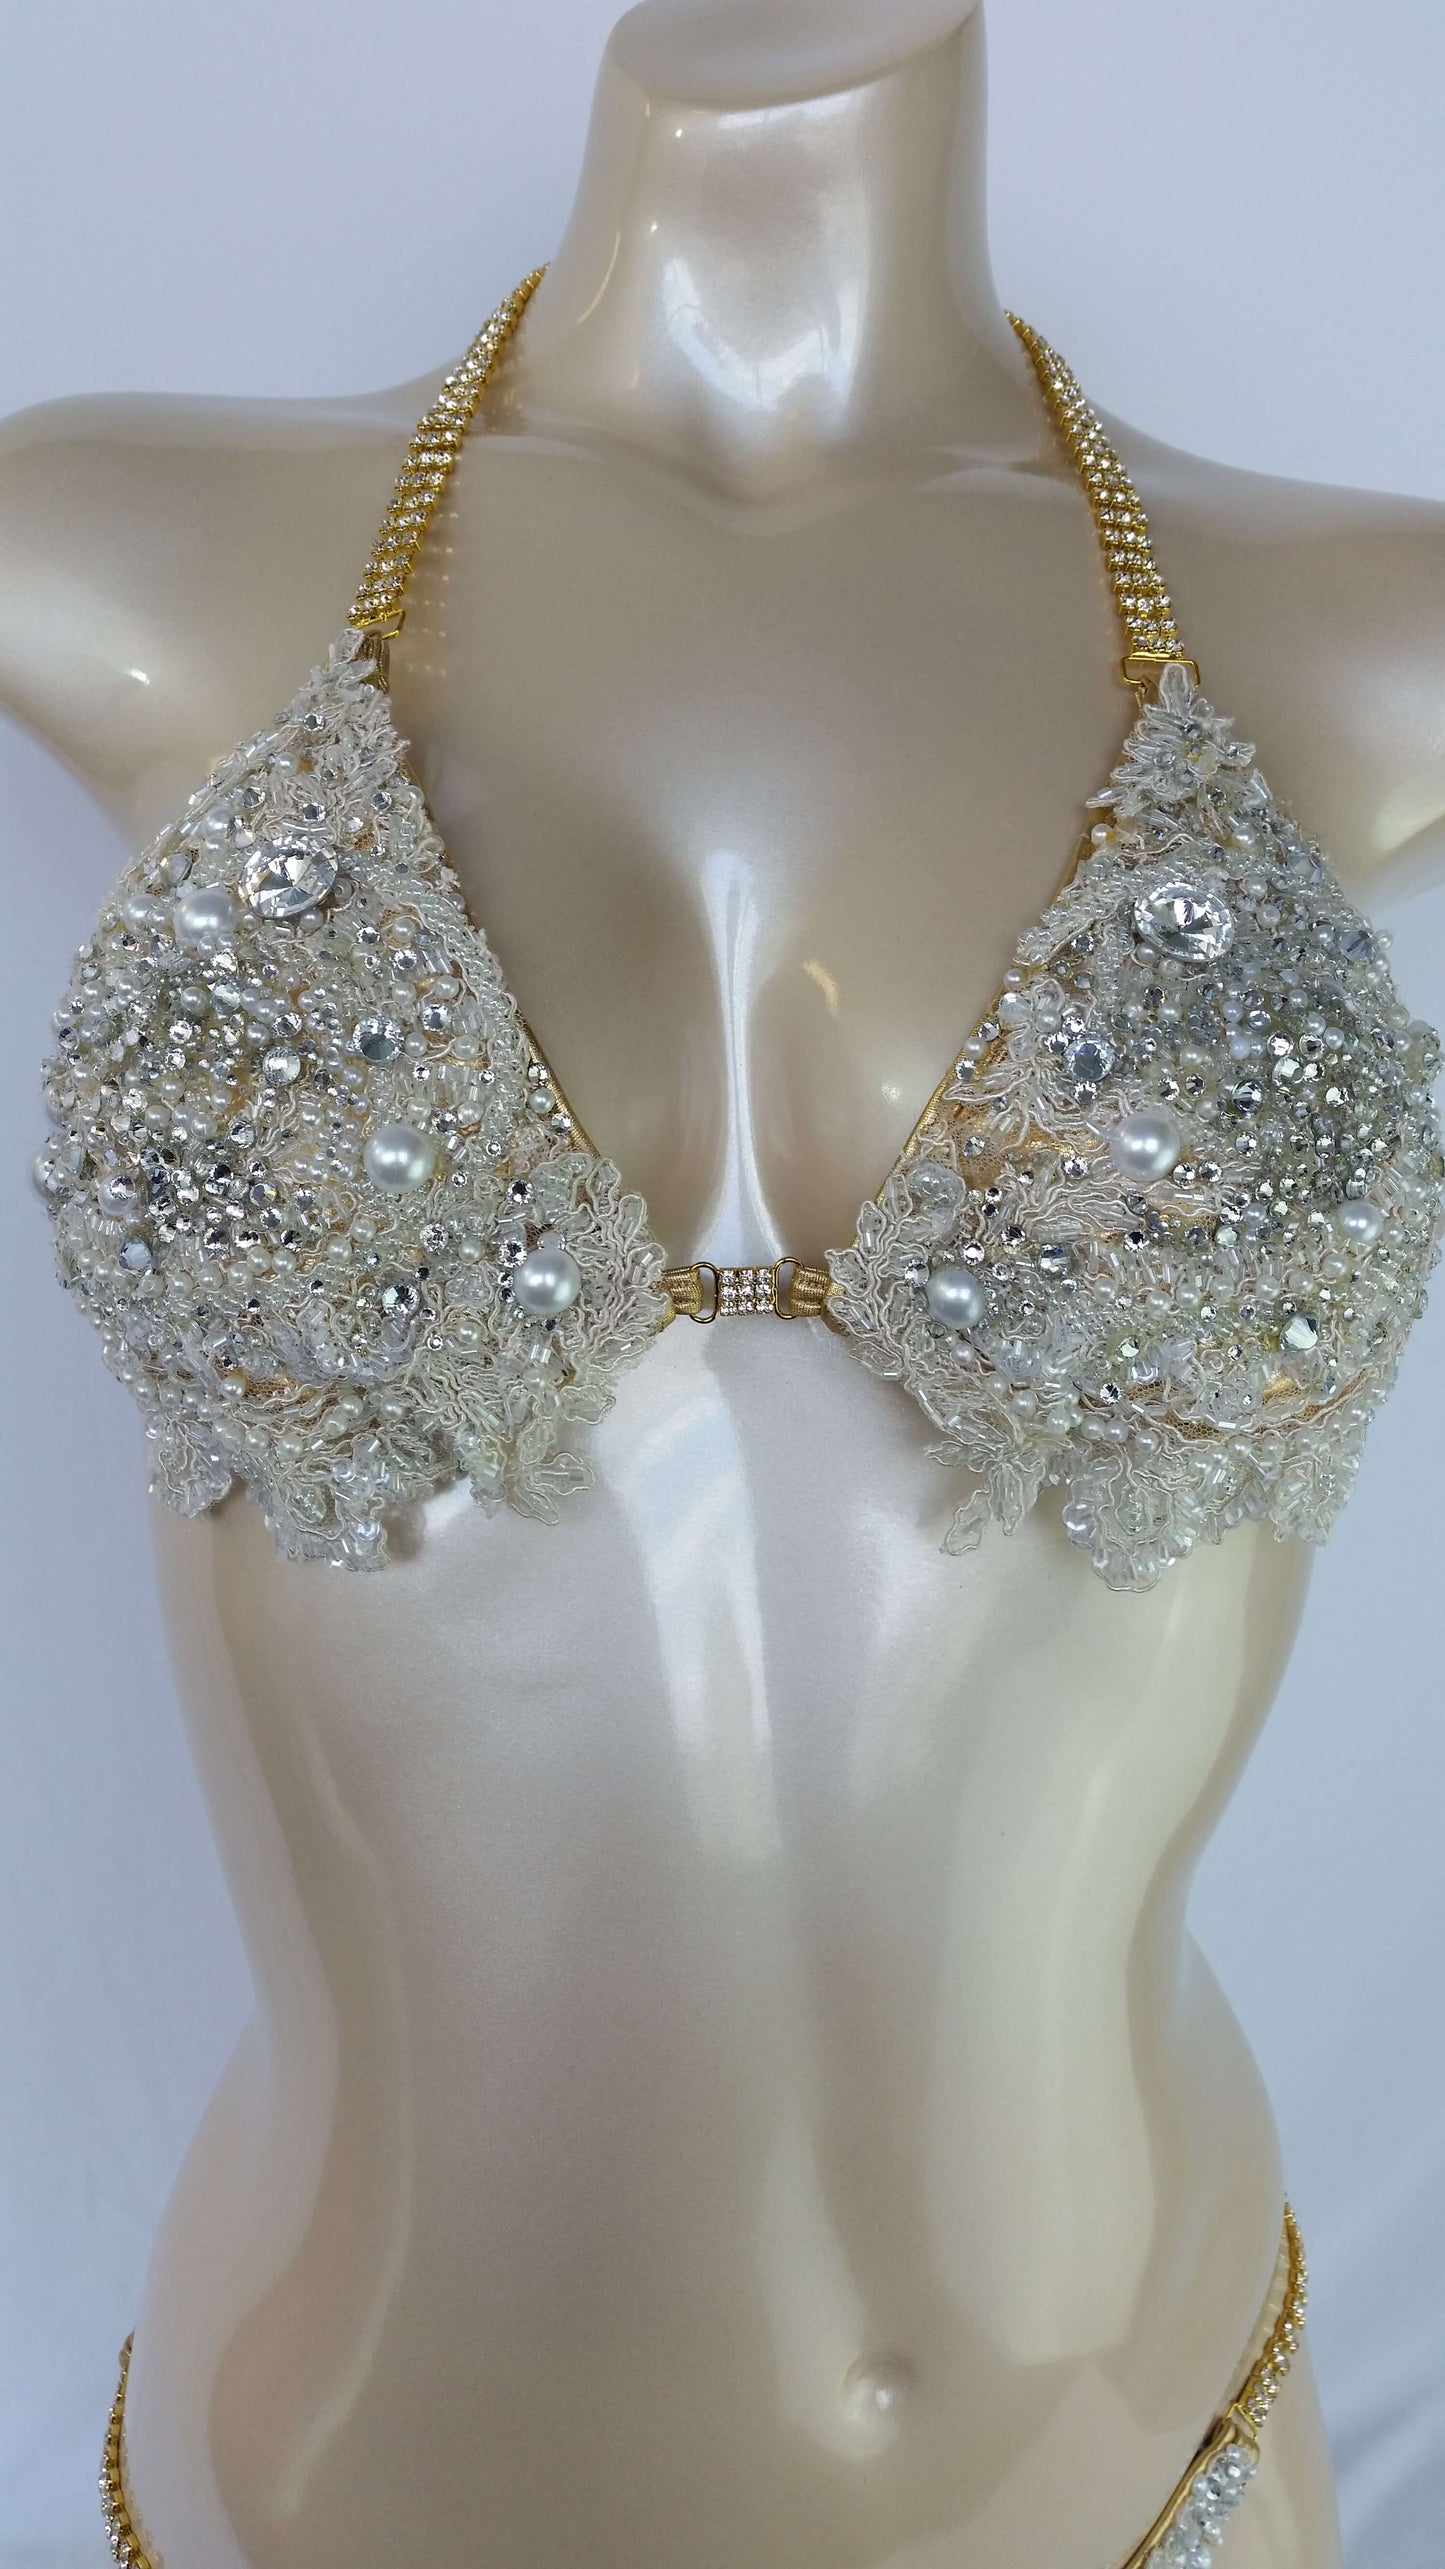 Gold bikini with wedding wateredlace fully encrusted with Crystal